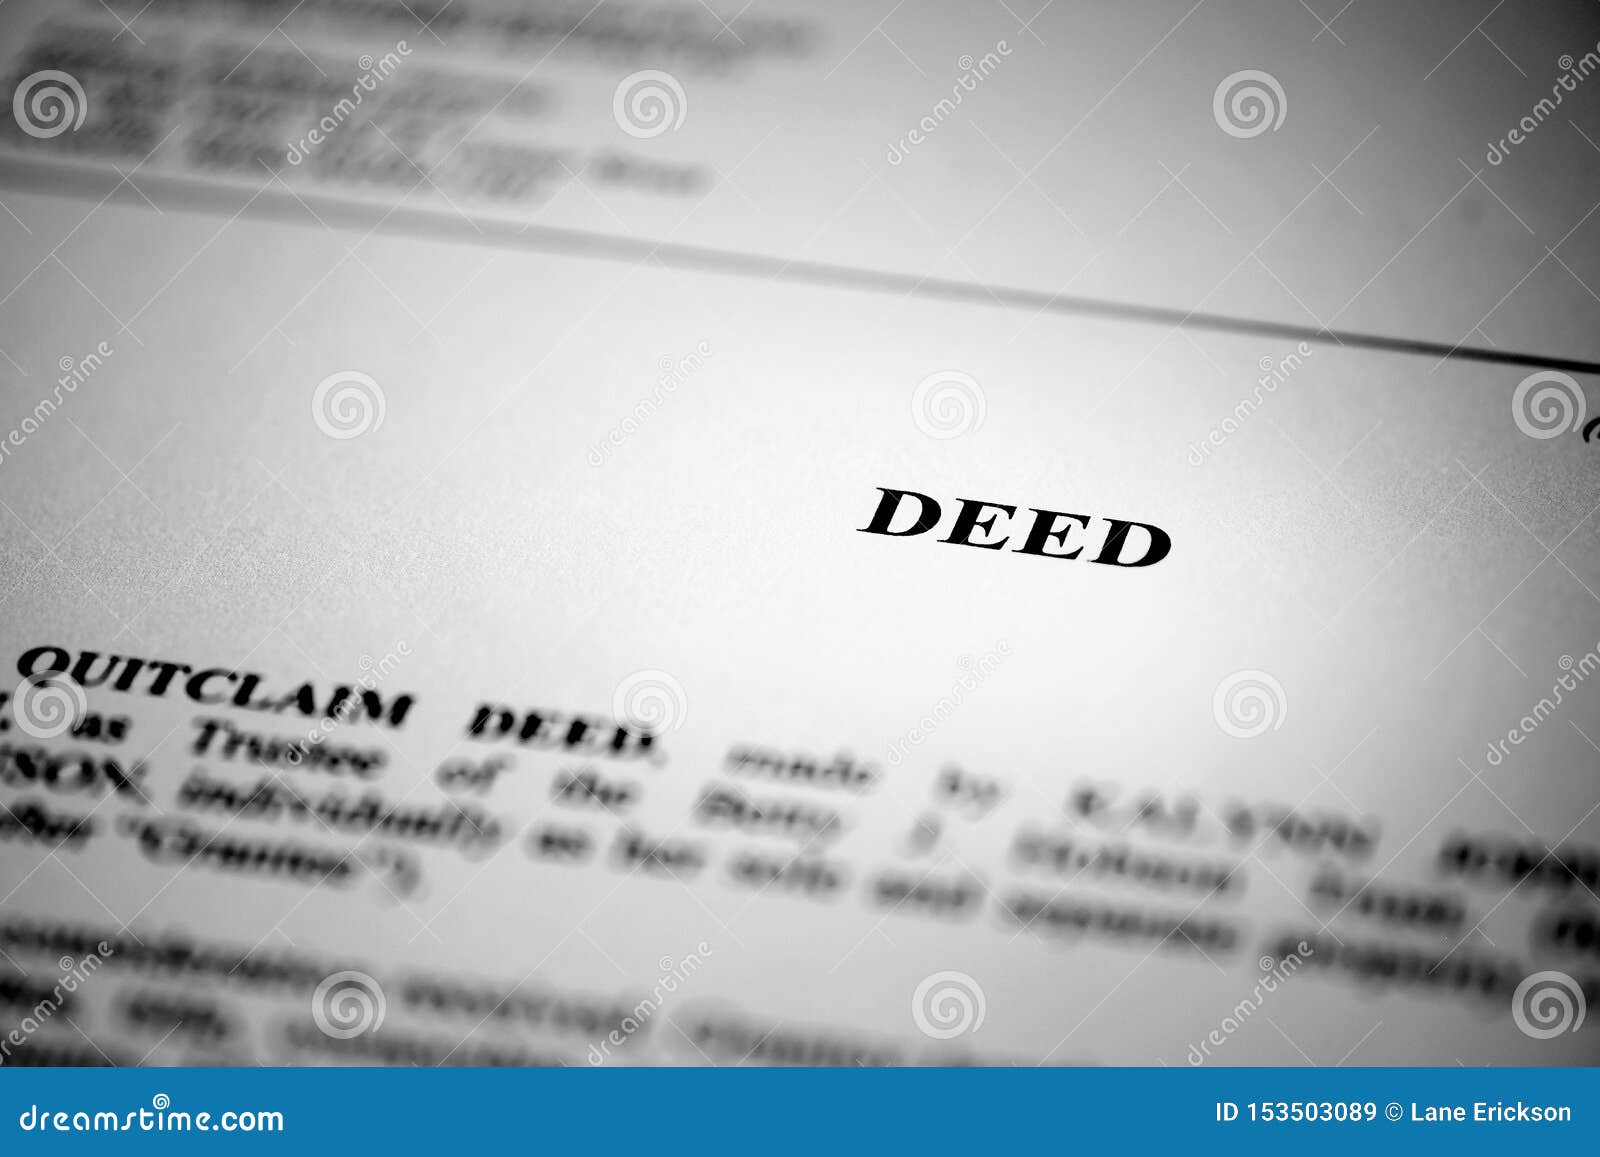 deed for real estate transfer or transaction contract